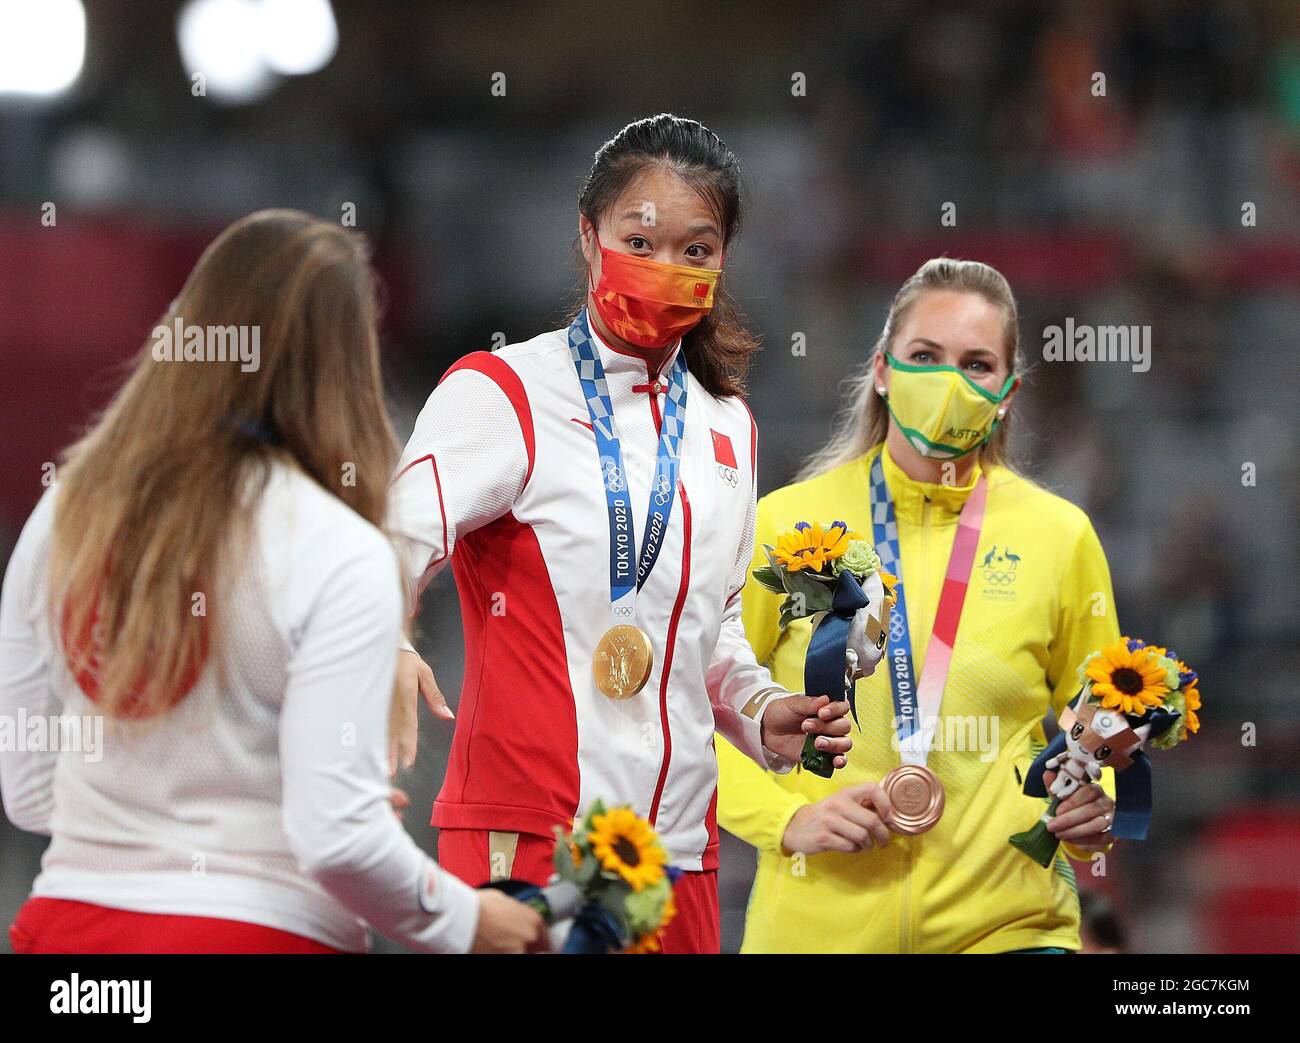 Tokyo, Japan. 7th Aug, 2021. Gold medalist Liu Shiying (C) of China, silver medalist Maria Andrejczyk (L) of Poland and bronze medalist Kelsey-Lee Barber of Australia react during the awarding ceremony of the Women's Javelin Throw at the Tokyo 2020 Olympic Games in Tokyo, Japan, Aug. 7, 2021. Credit: Li Ming/Xinhua/Alamy Live News Stock Photo